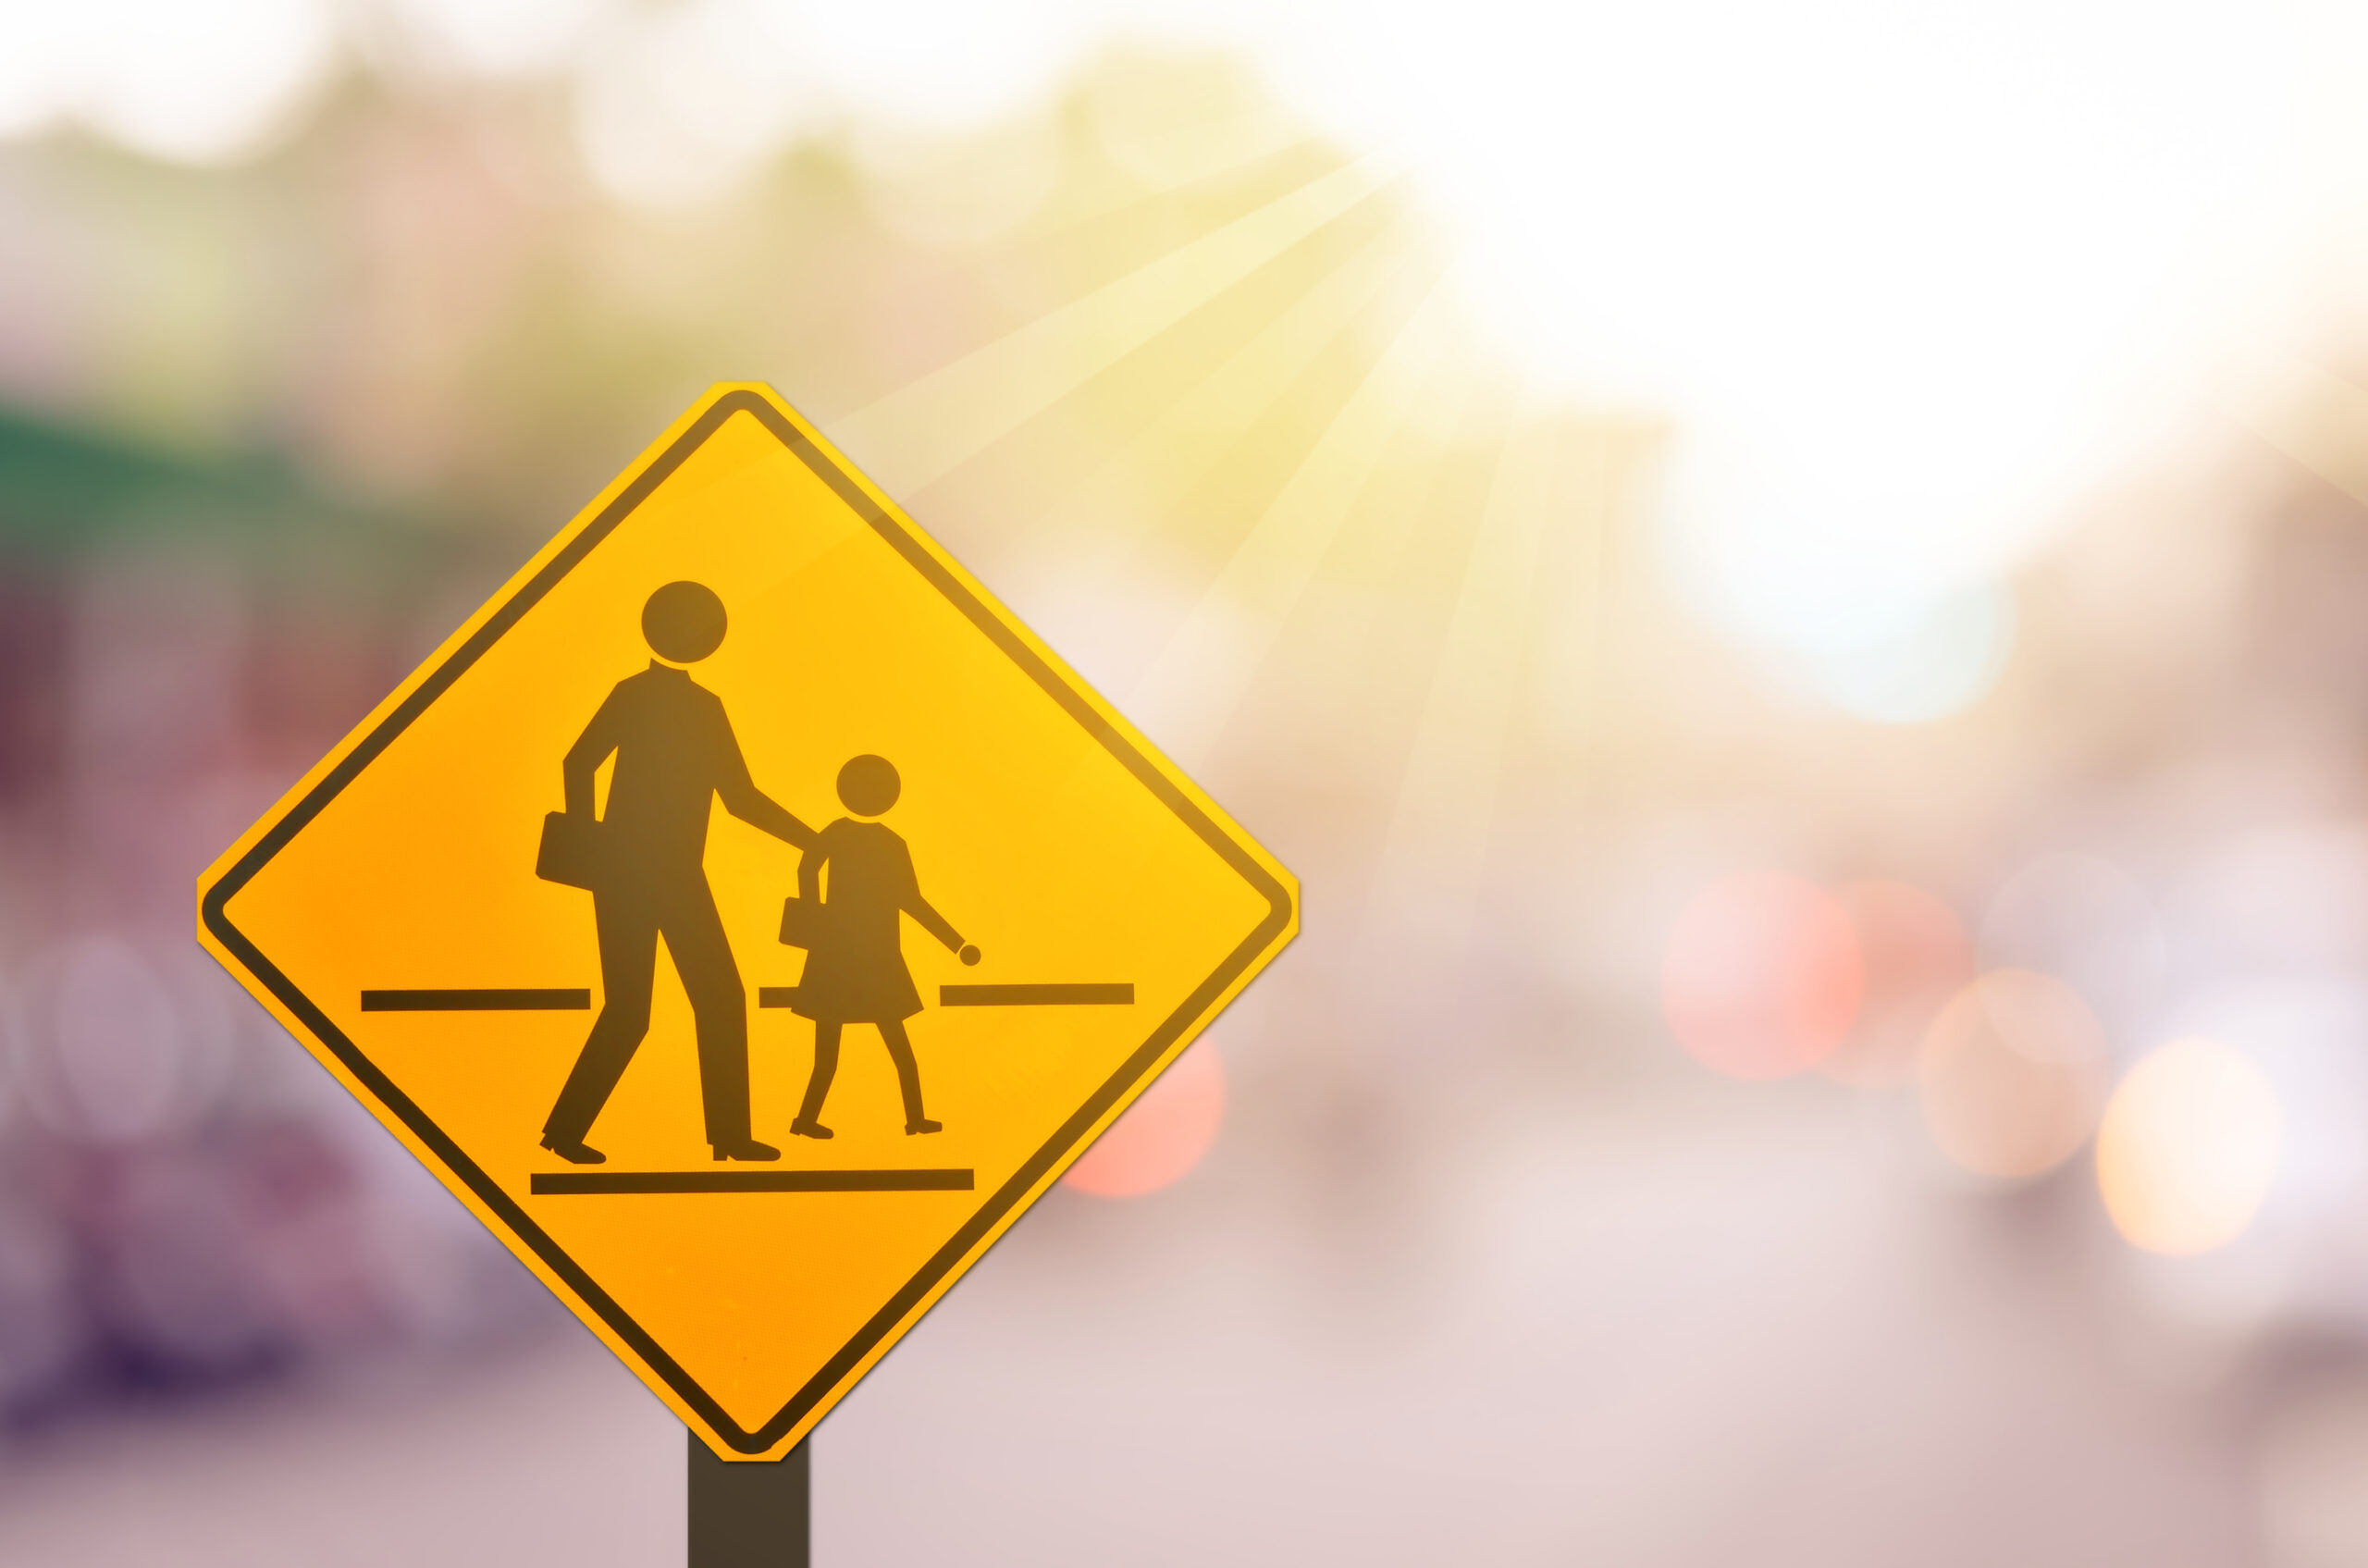 School zone warning sign on blur traffic road with colorful light abstract background